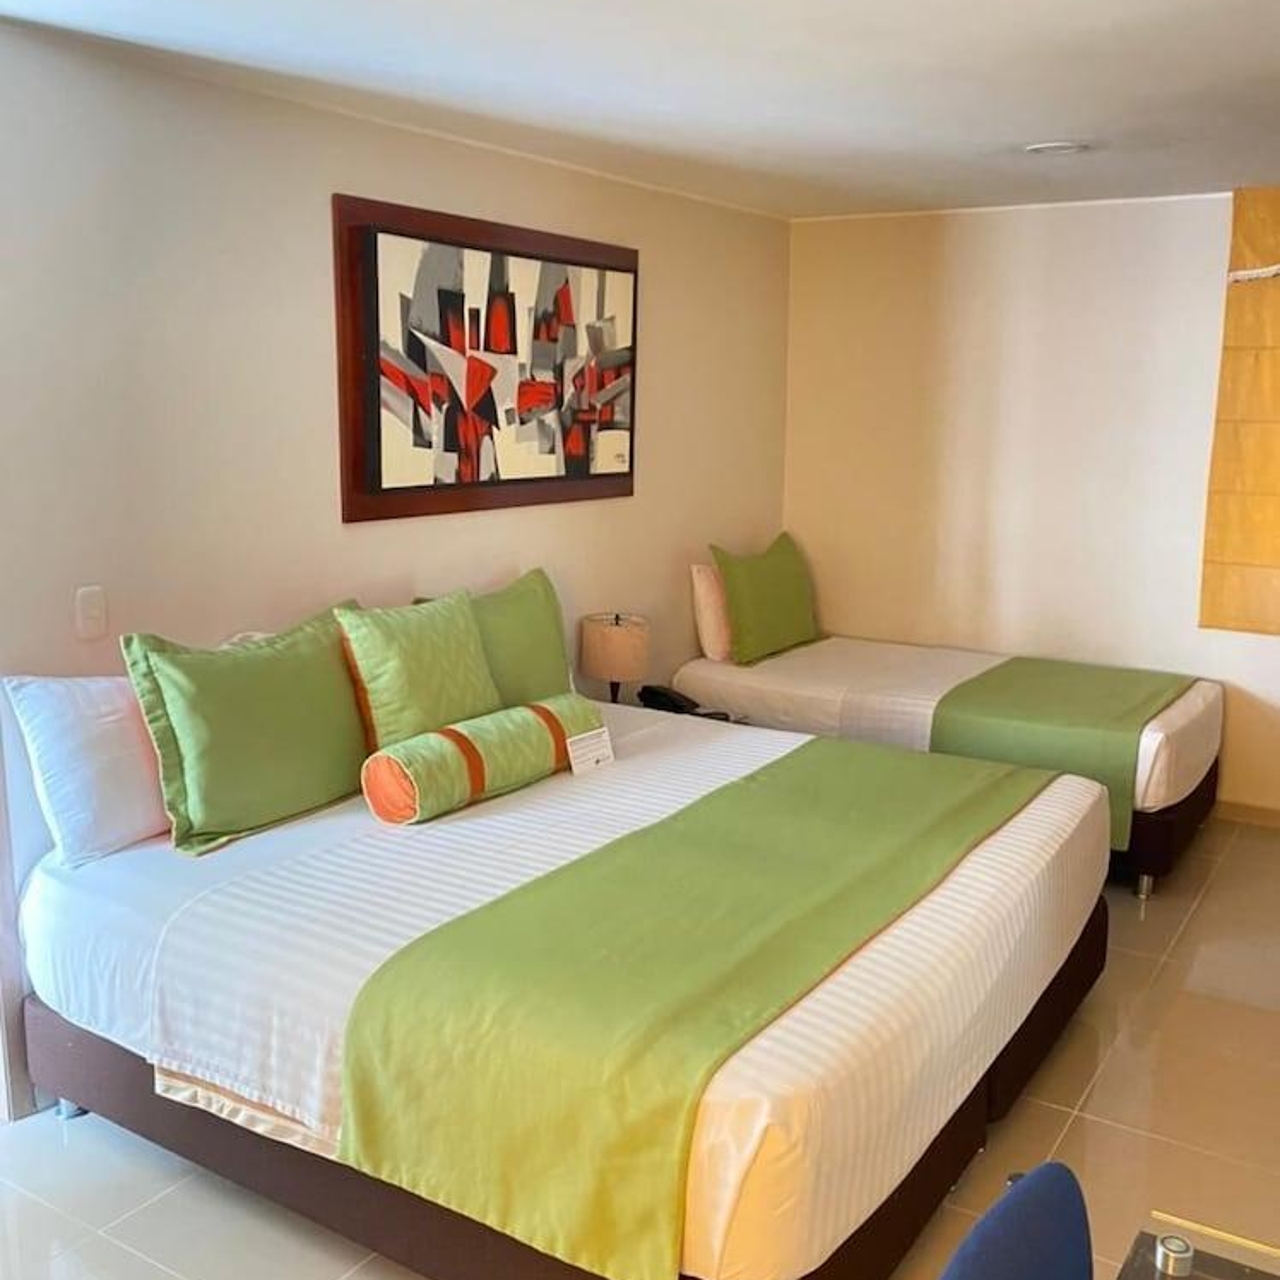 Hotel Cabecera Country - 3 HRS star hotel in Bucaramanga